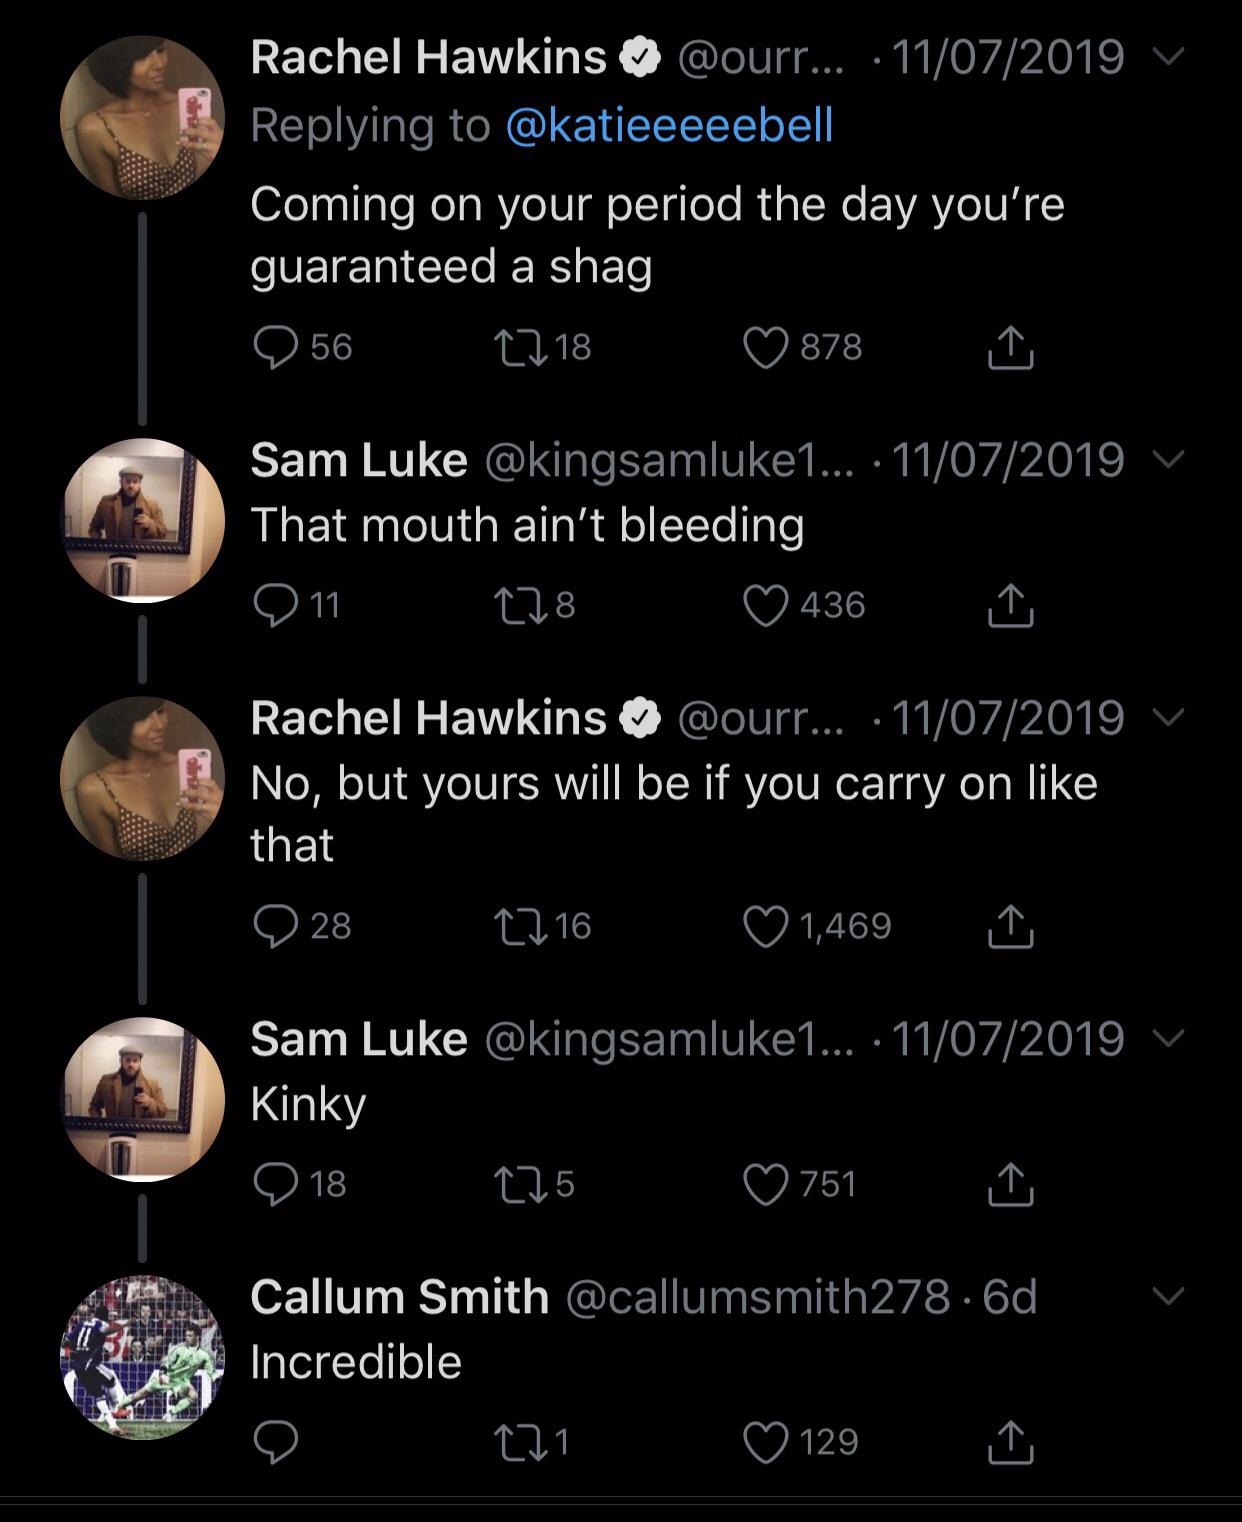 Rachel Hawkins .. Coming on your period the day you're guaranteed a shag19 V That mouth ain't bleeding ... No, but yours will be if you carry on that